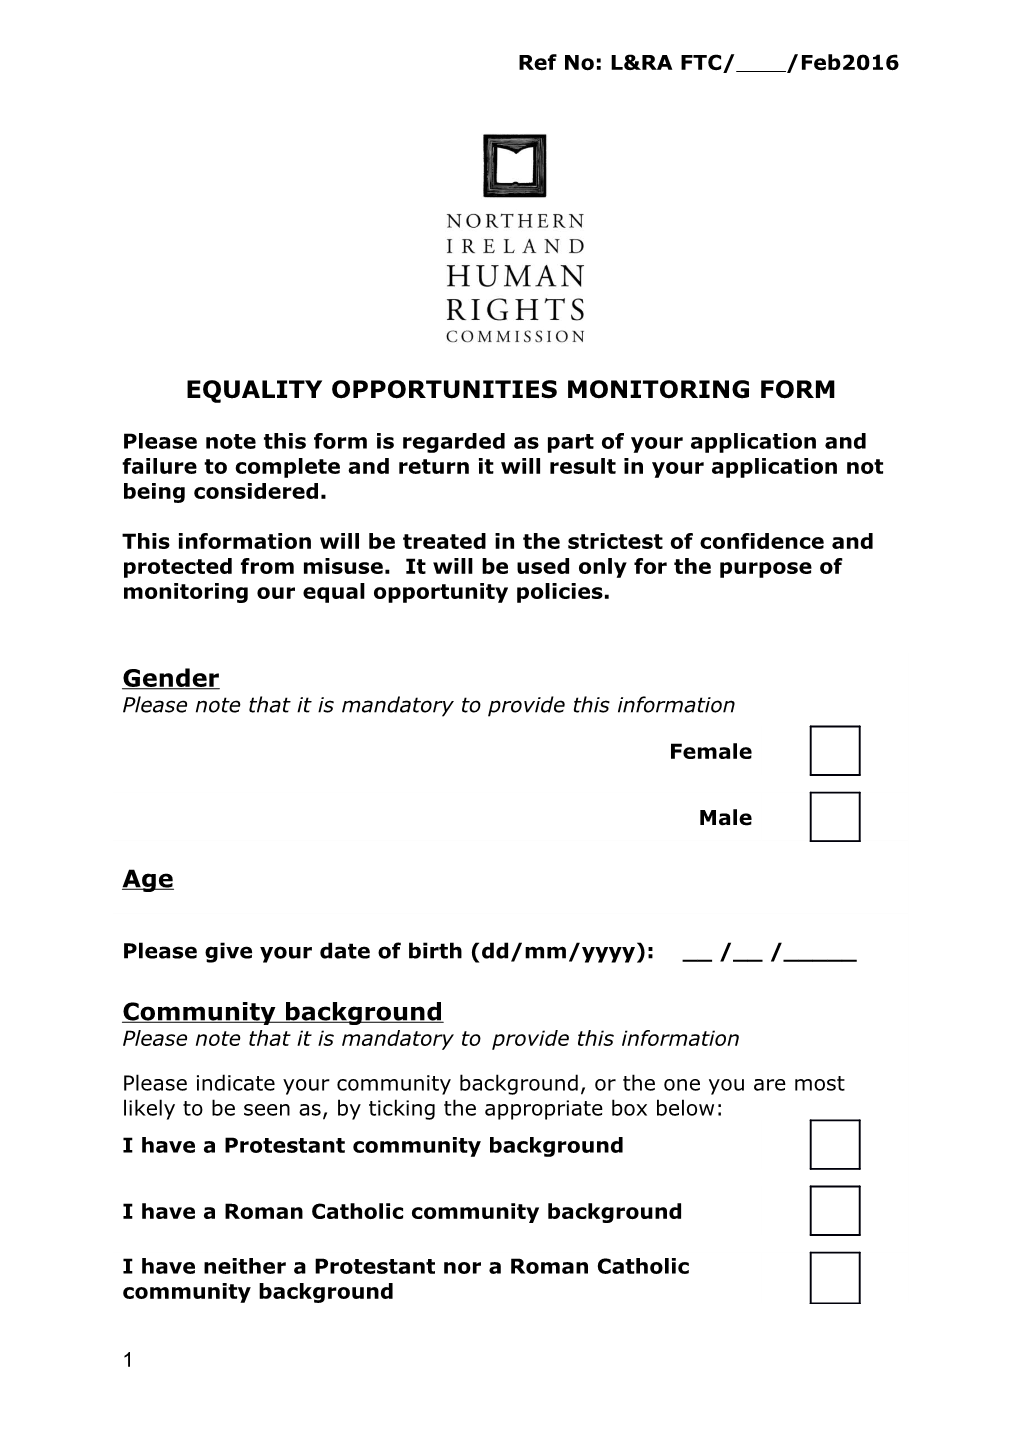 Equality Opportunities Monitoring Form